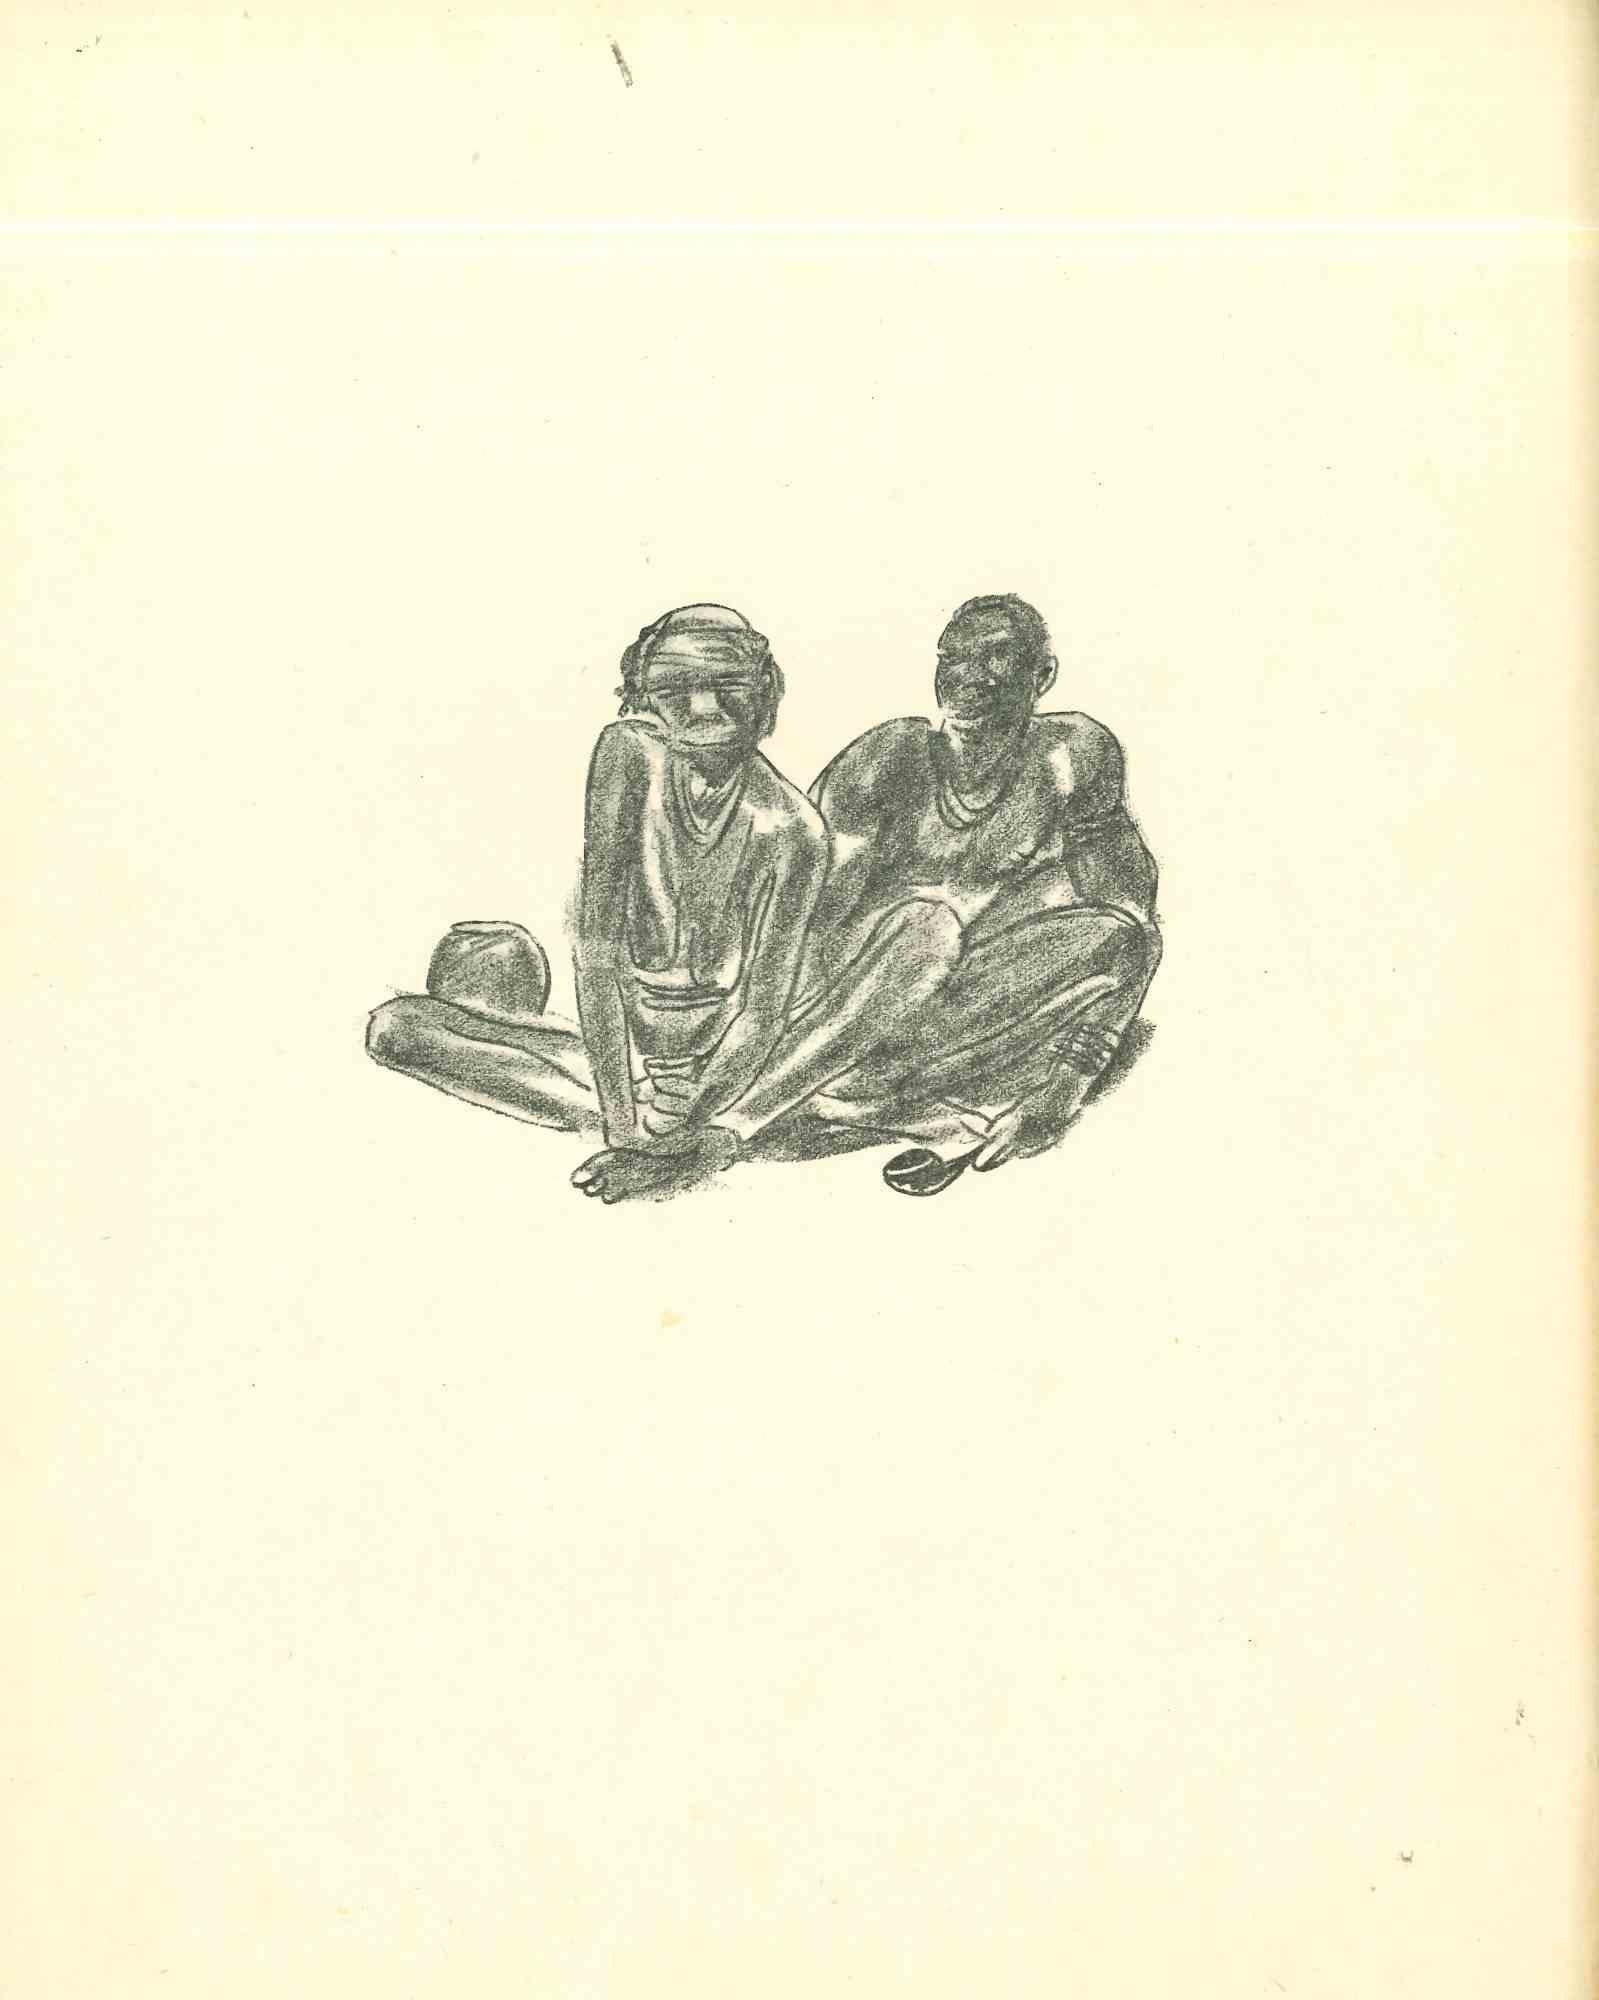 Free Time in Africa is an original lithograph realized in the early 1930s by Emmanuel Gondouin, (Versailles, 1883 - Parigi, 1934) 

 The artwork is depicted through strong strokes and is part of a series entitled "Africa". 

 Emmanuel Gondouin is a